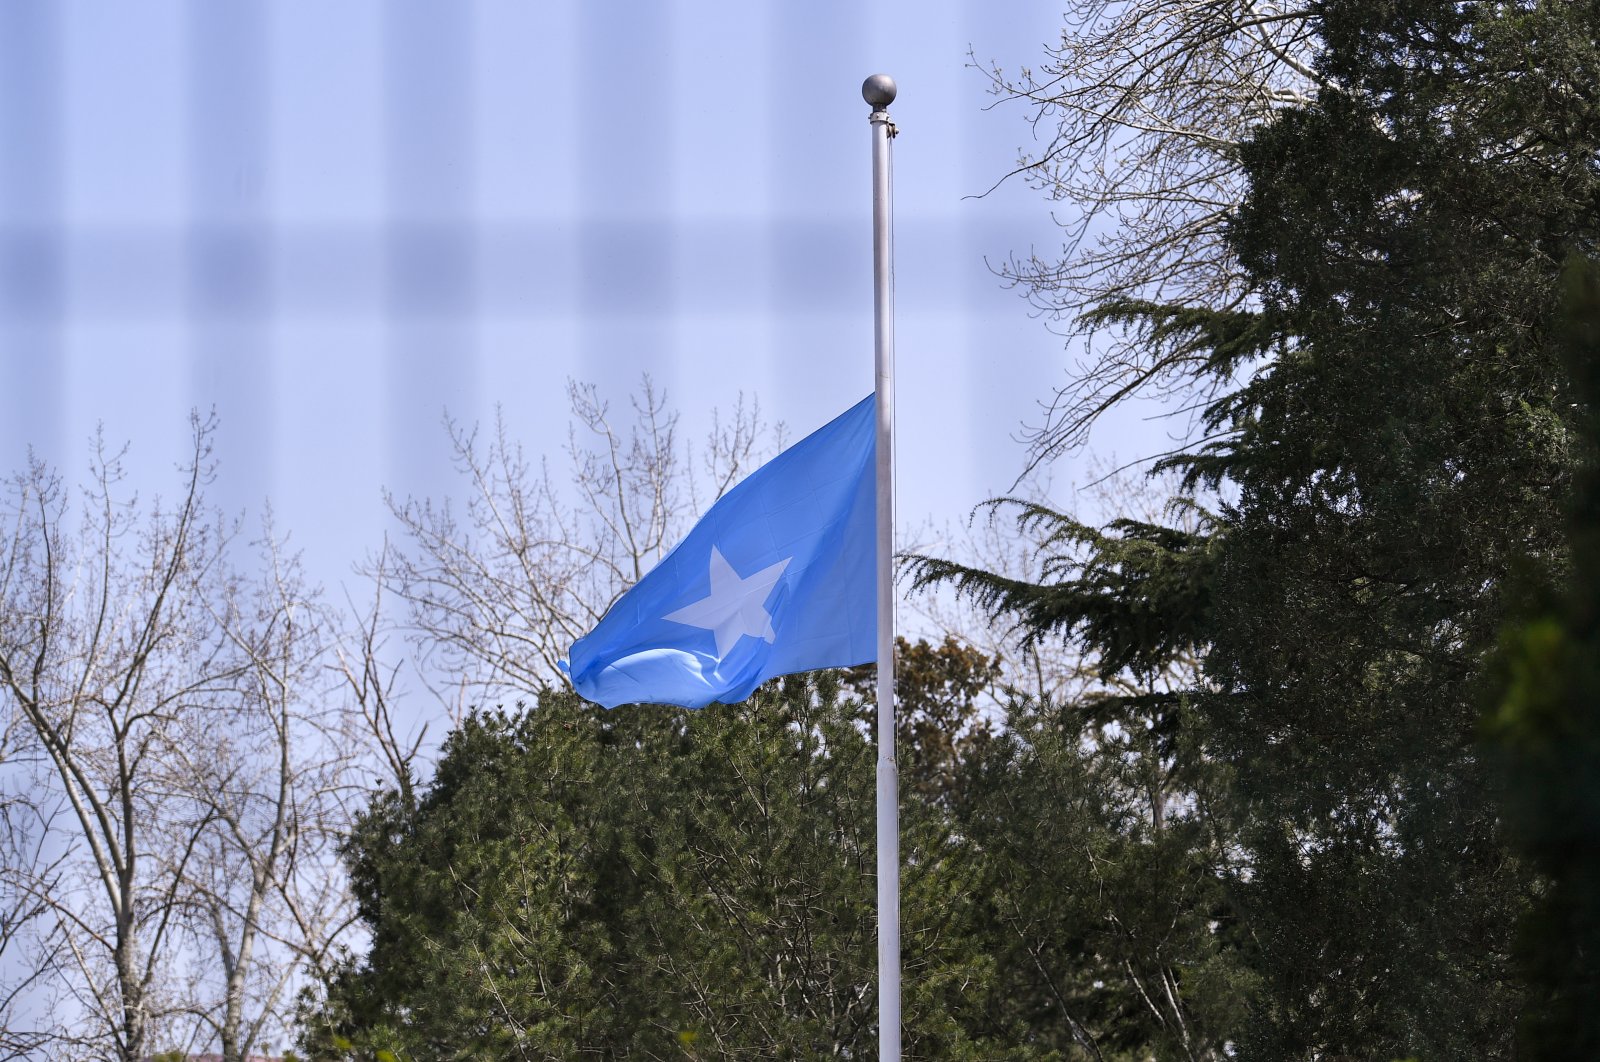 A Somalia flag is lowered to half mast to mourn for the martyrs who died in the fight of COVID-19 in the Somalia embassy in Beijing, China, April 4, 2020. (Reuters Photo)